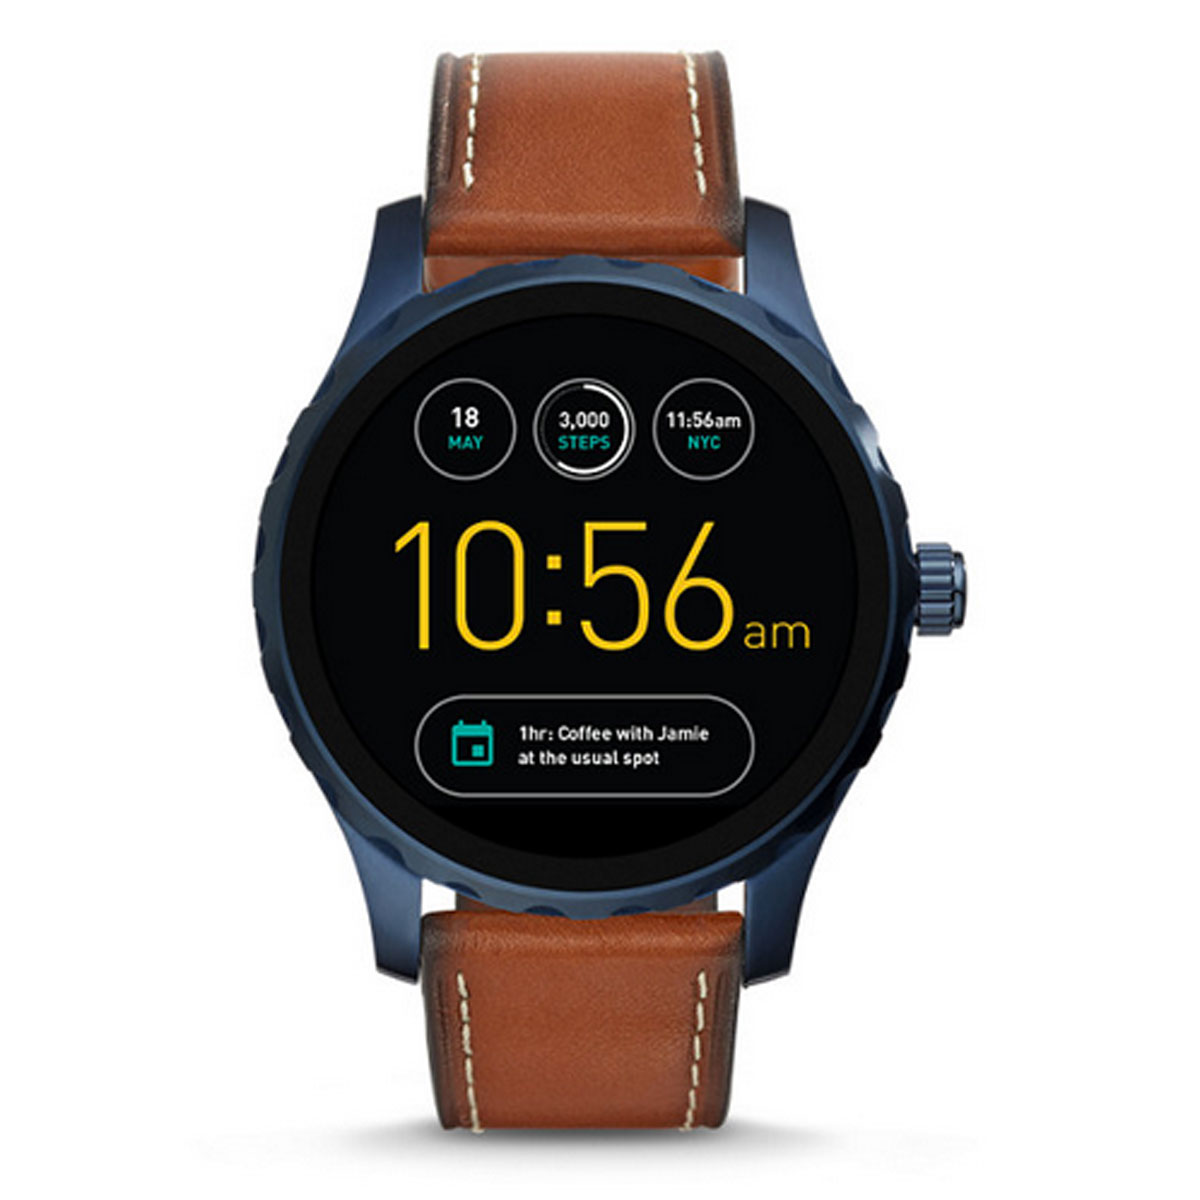 Gen 2 smartwatch Q Marshal brown leather, £229, Fossil